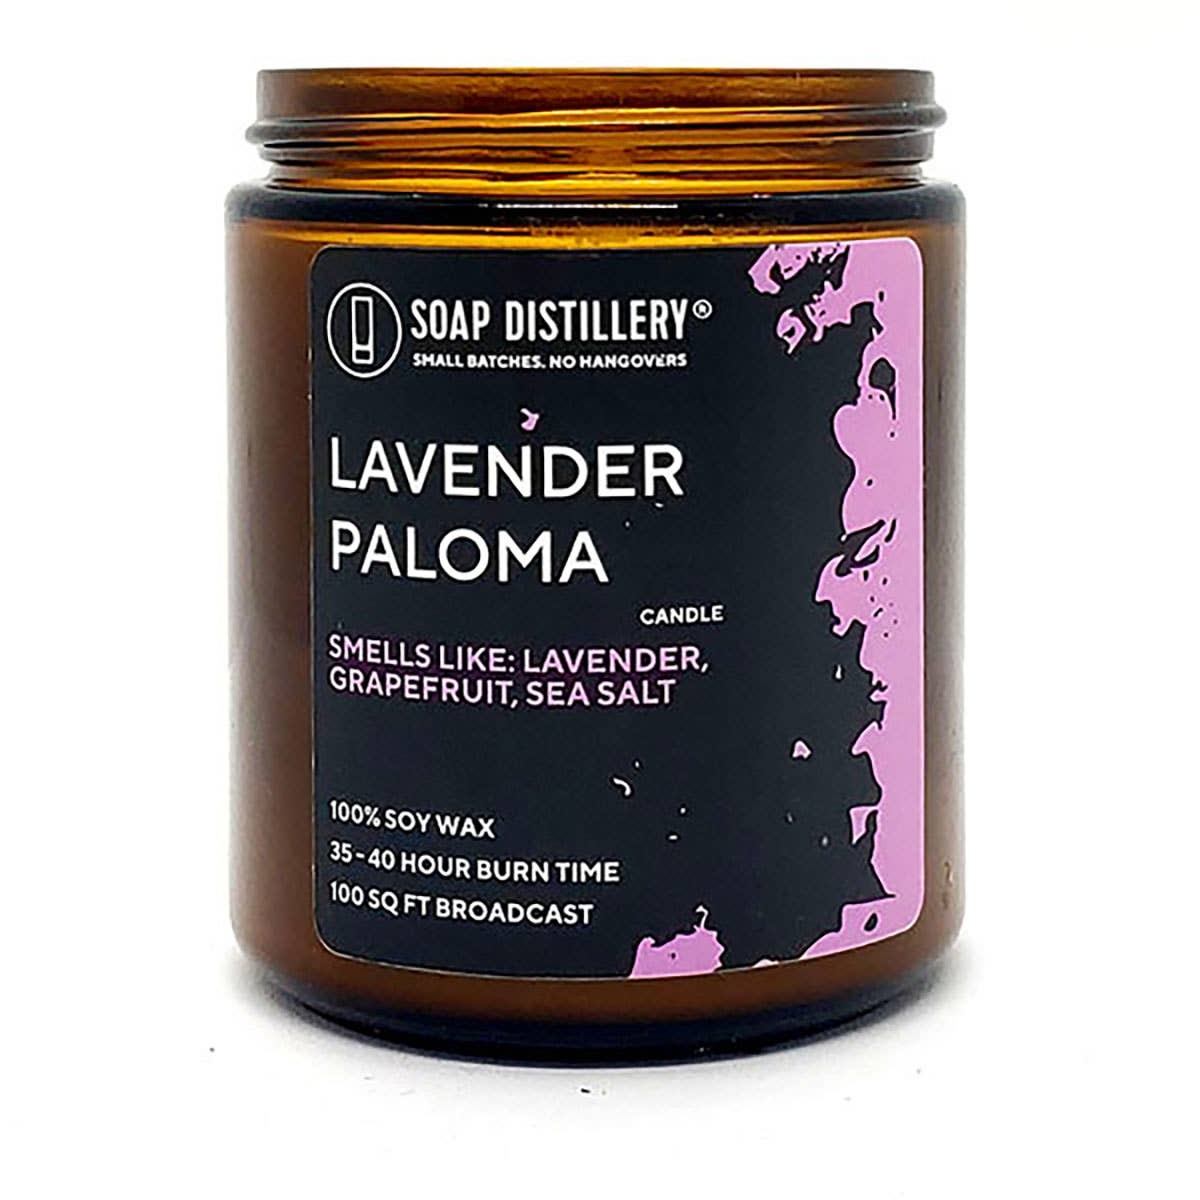 SALE! Lavender Paloma Soy Wax Candle